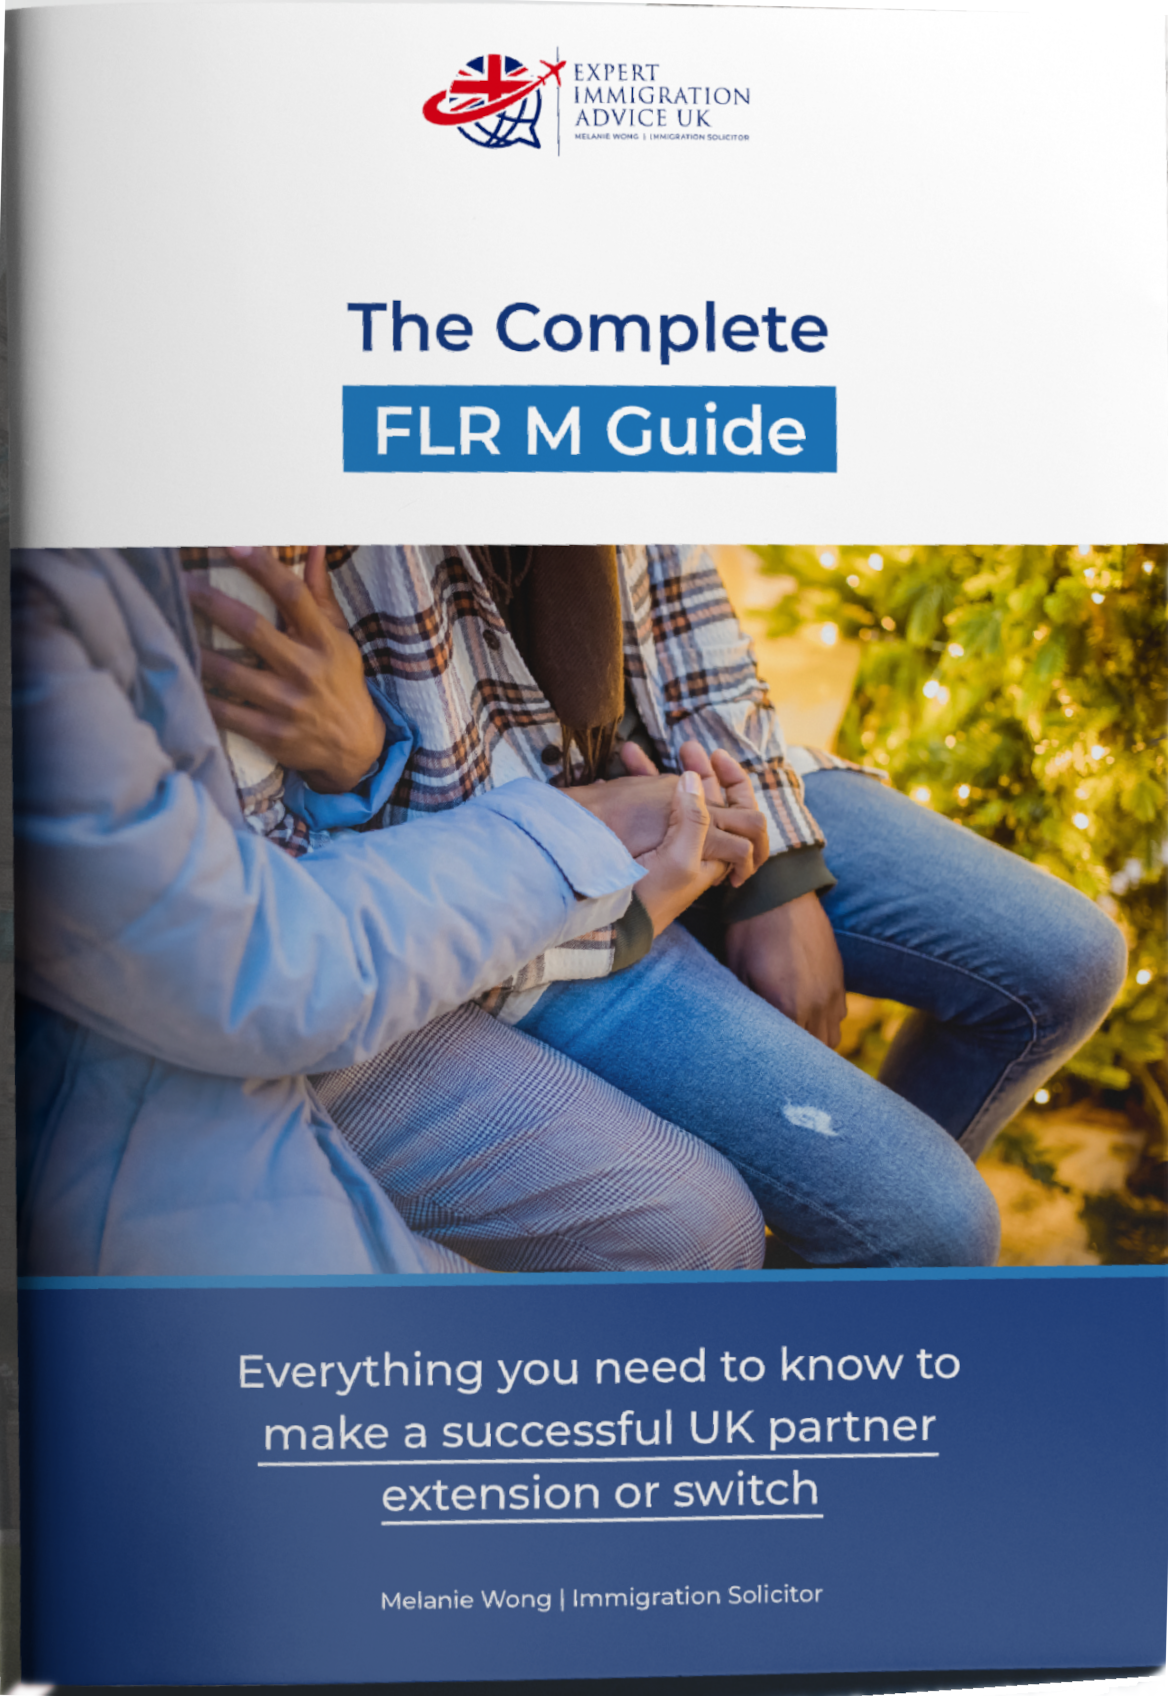 FLR M Guide | Spouse Visa Extension | Melanie Wong Immigration Solicitor